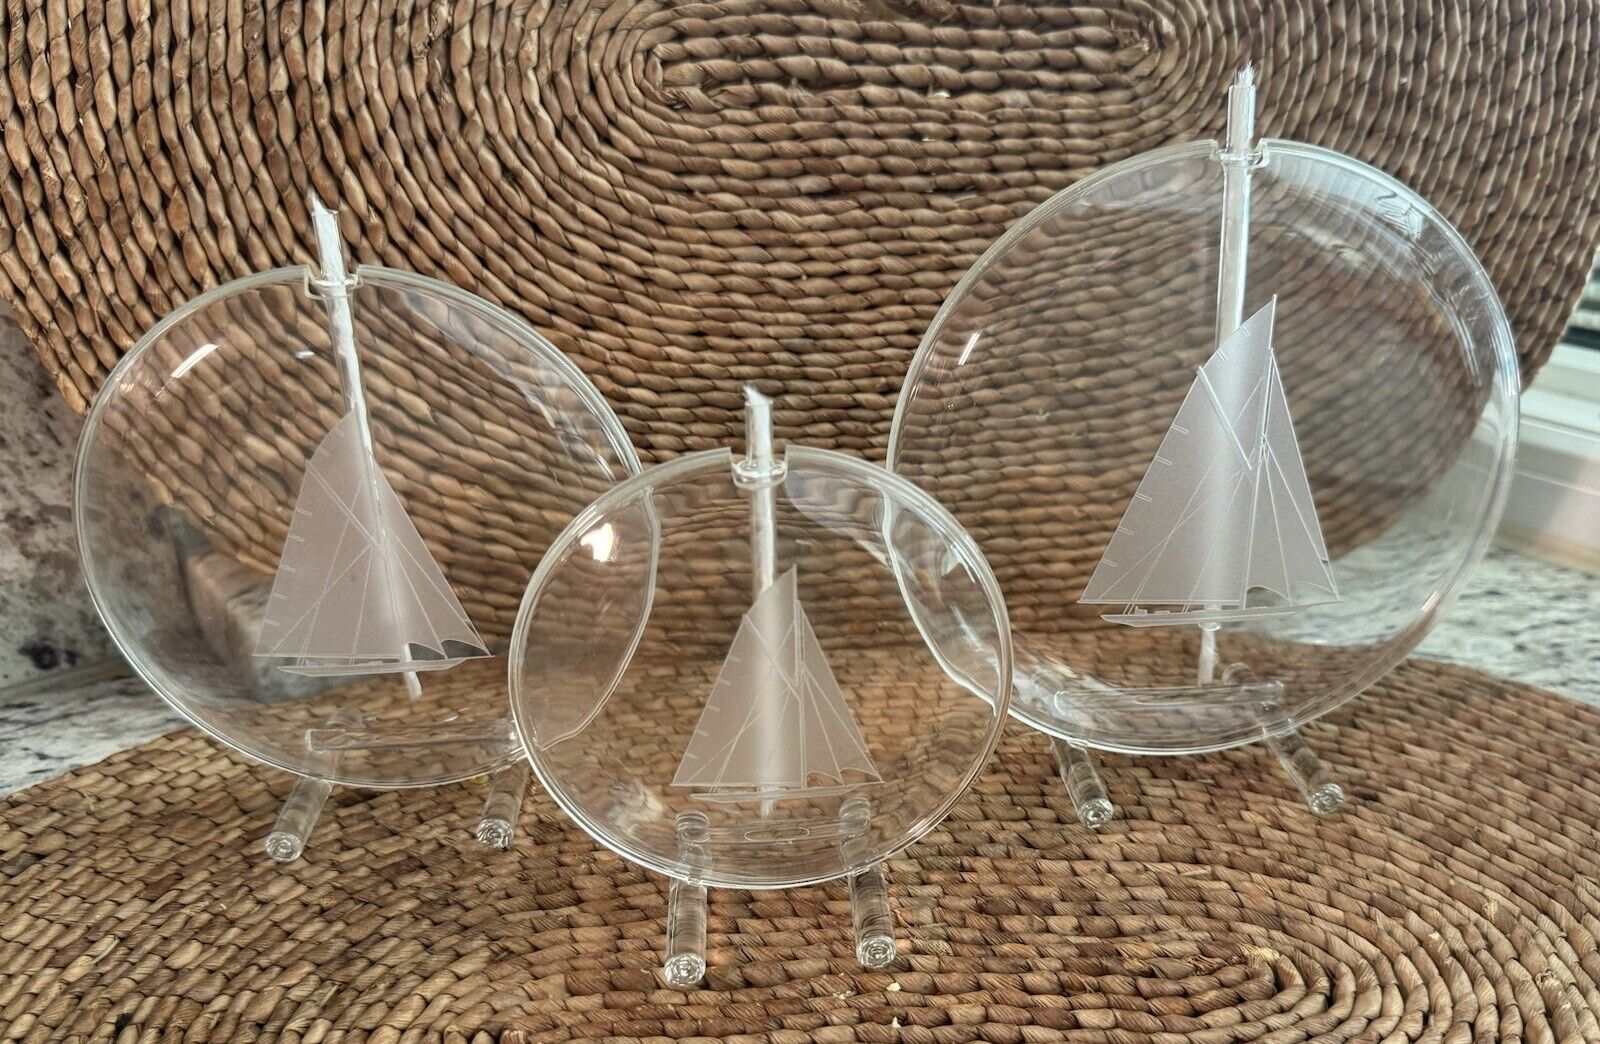 3 ENGRAVED SCHOONER GLASS DIMENSIONS 6 5 4 INCH ILLUSION LAMPS ESSEX MA USA